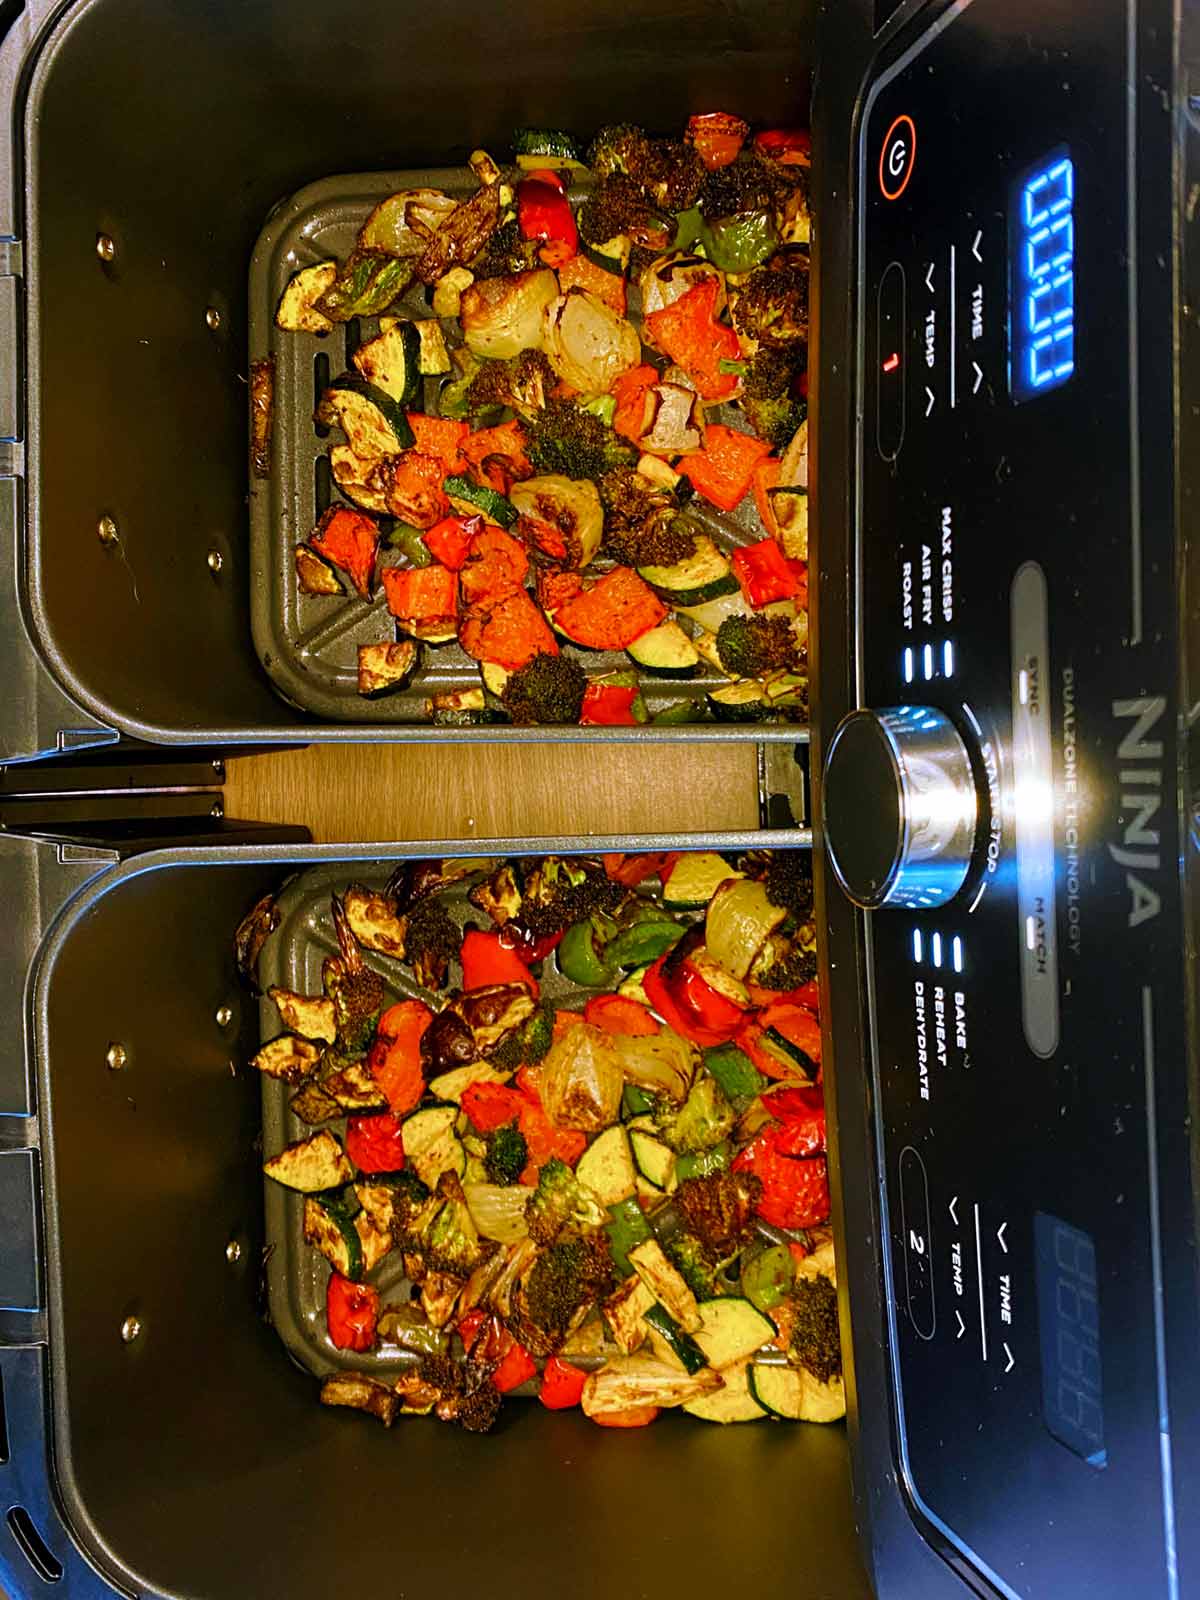 Cooked, chopped vegetables in an open air fryer.